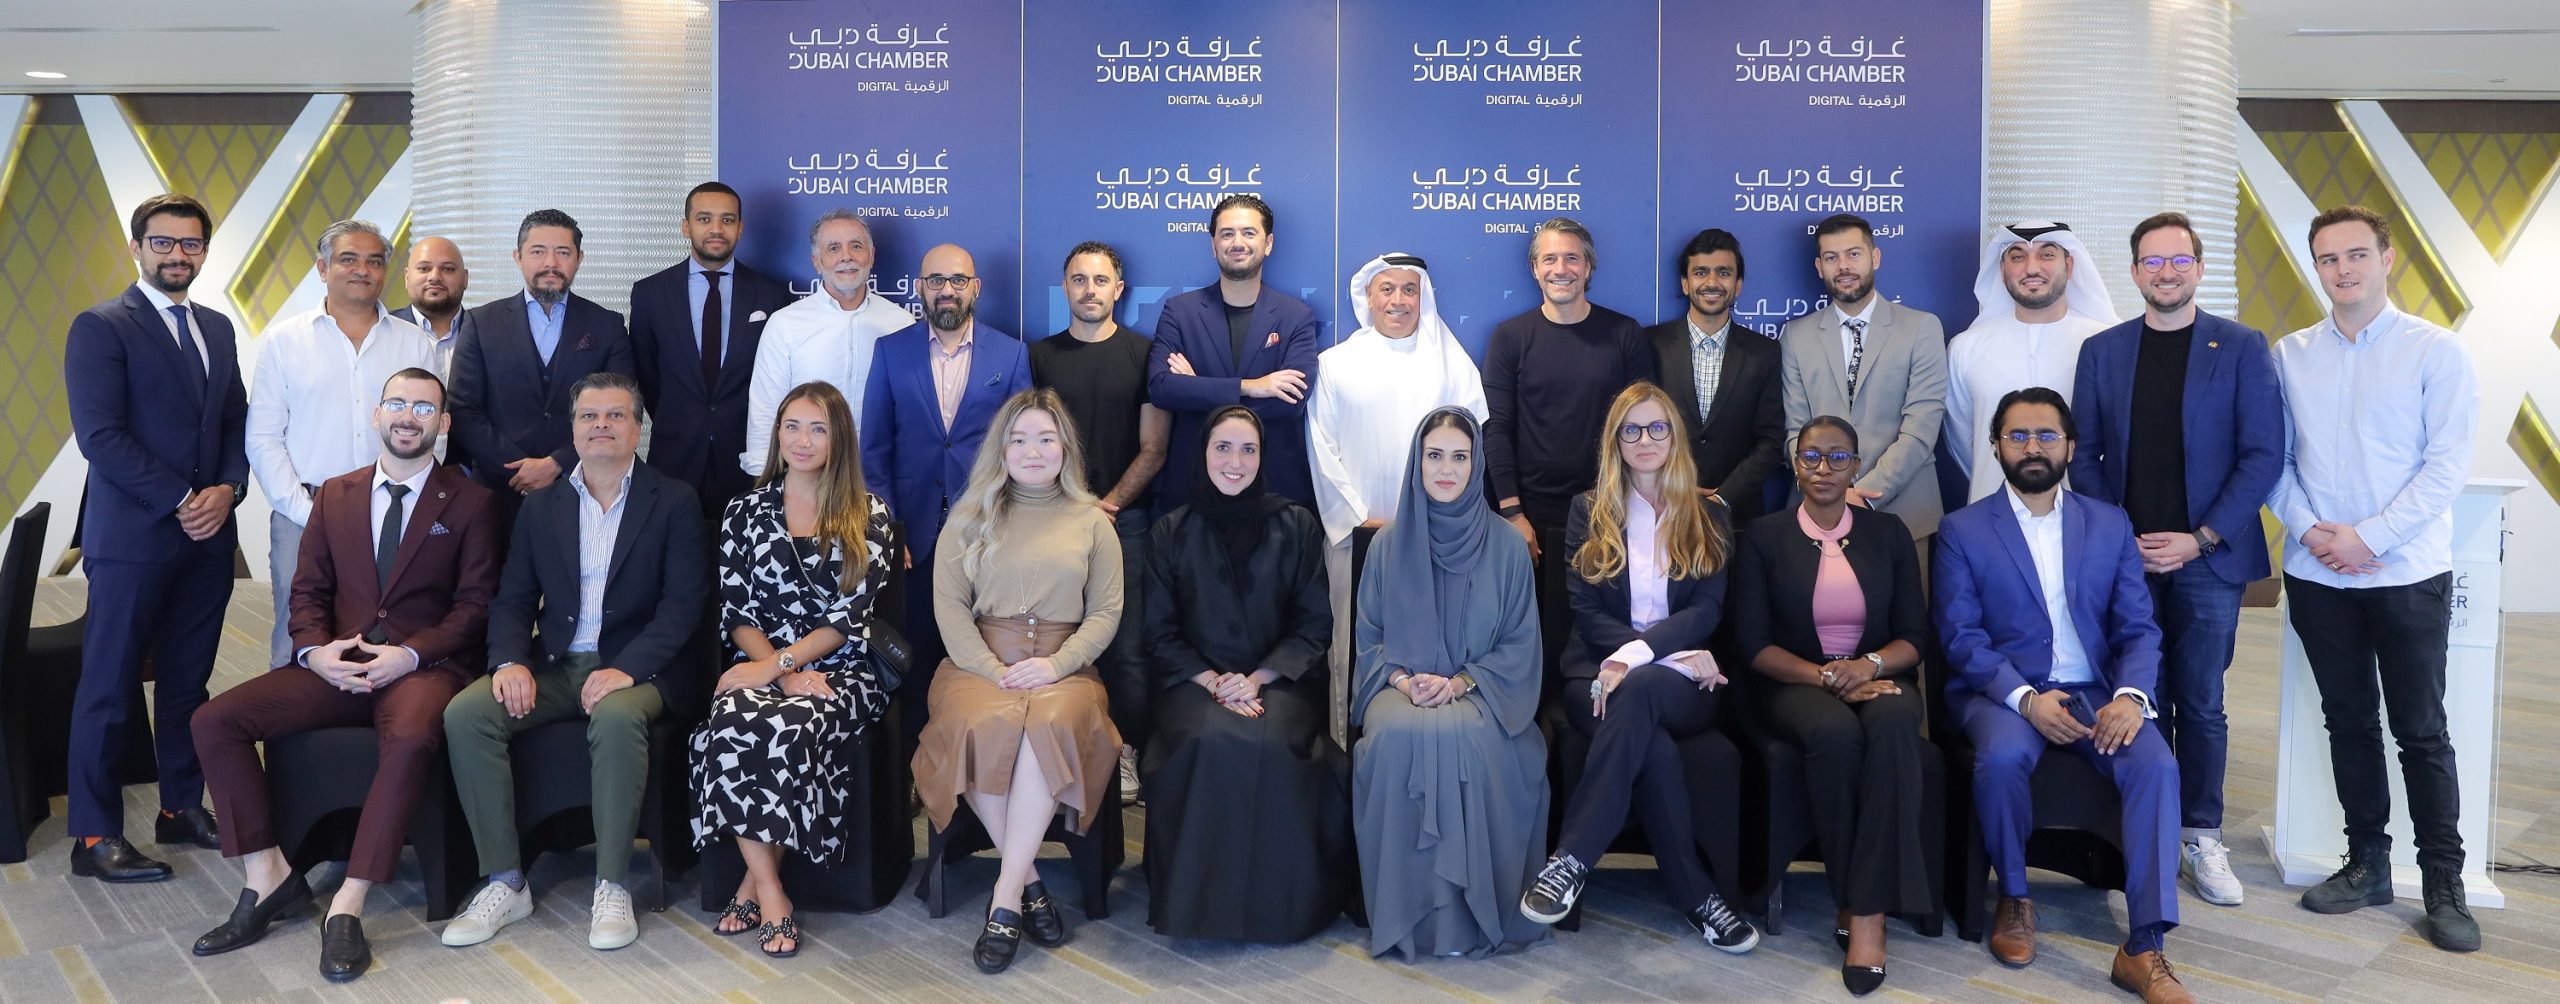 Dubai Chamber of Digital Economy Drives Meaningful Discussions of the Metaverse and Cryptocurrencies